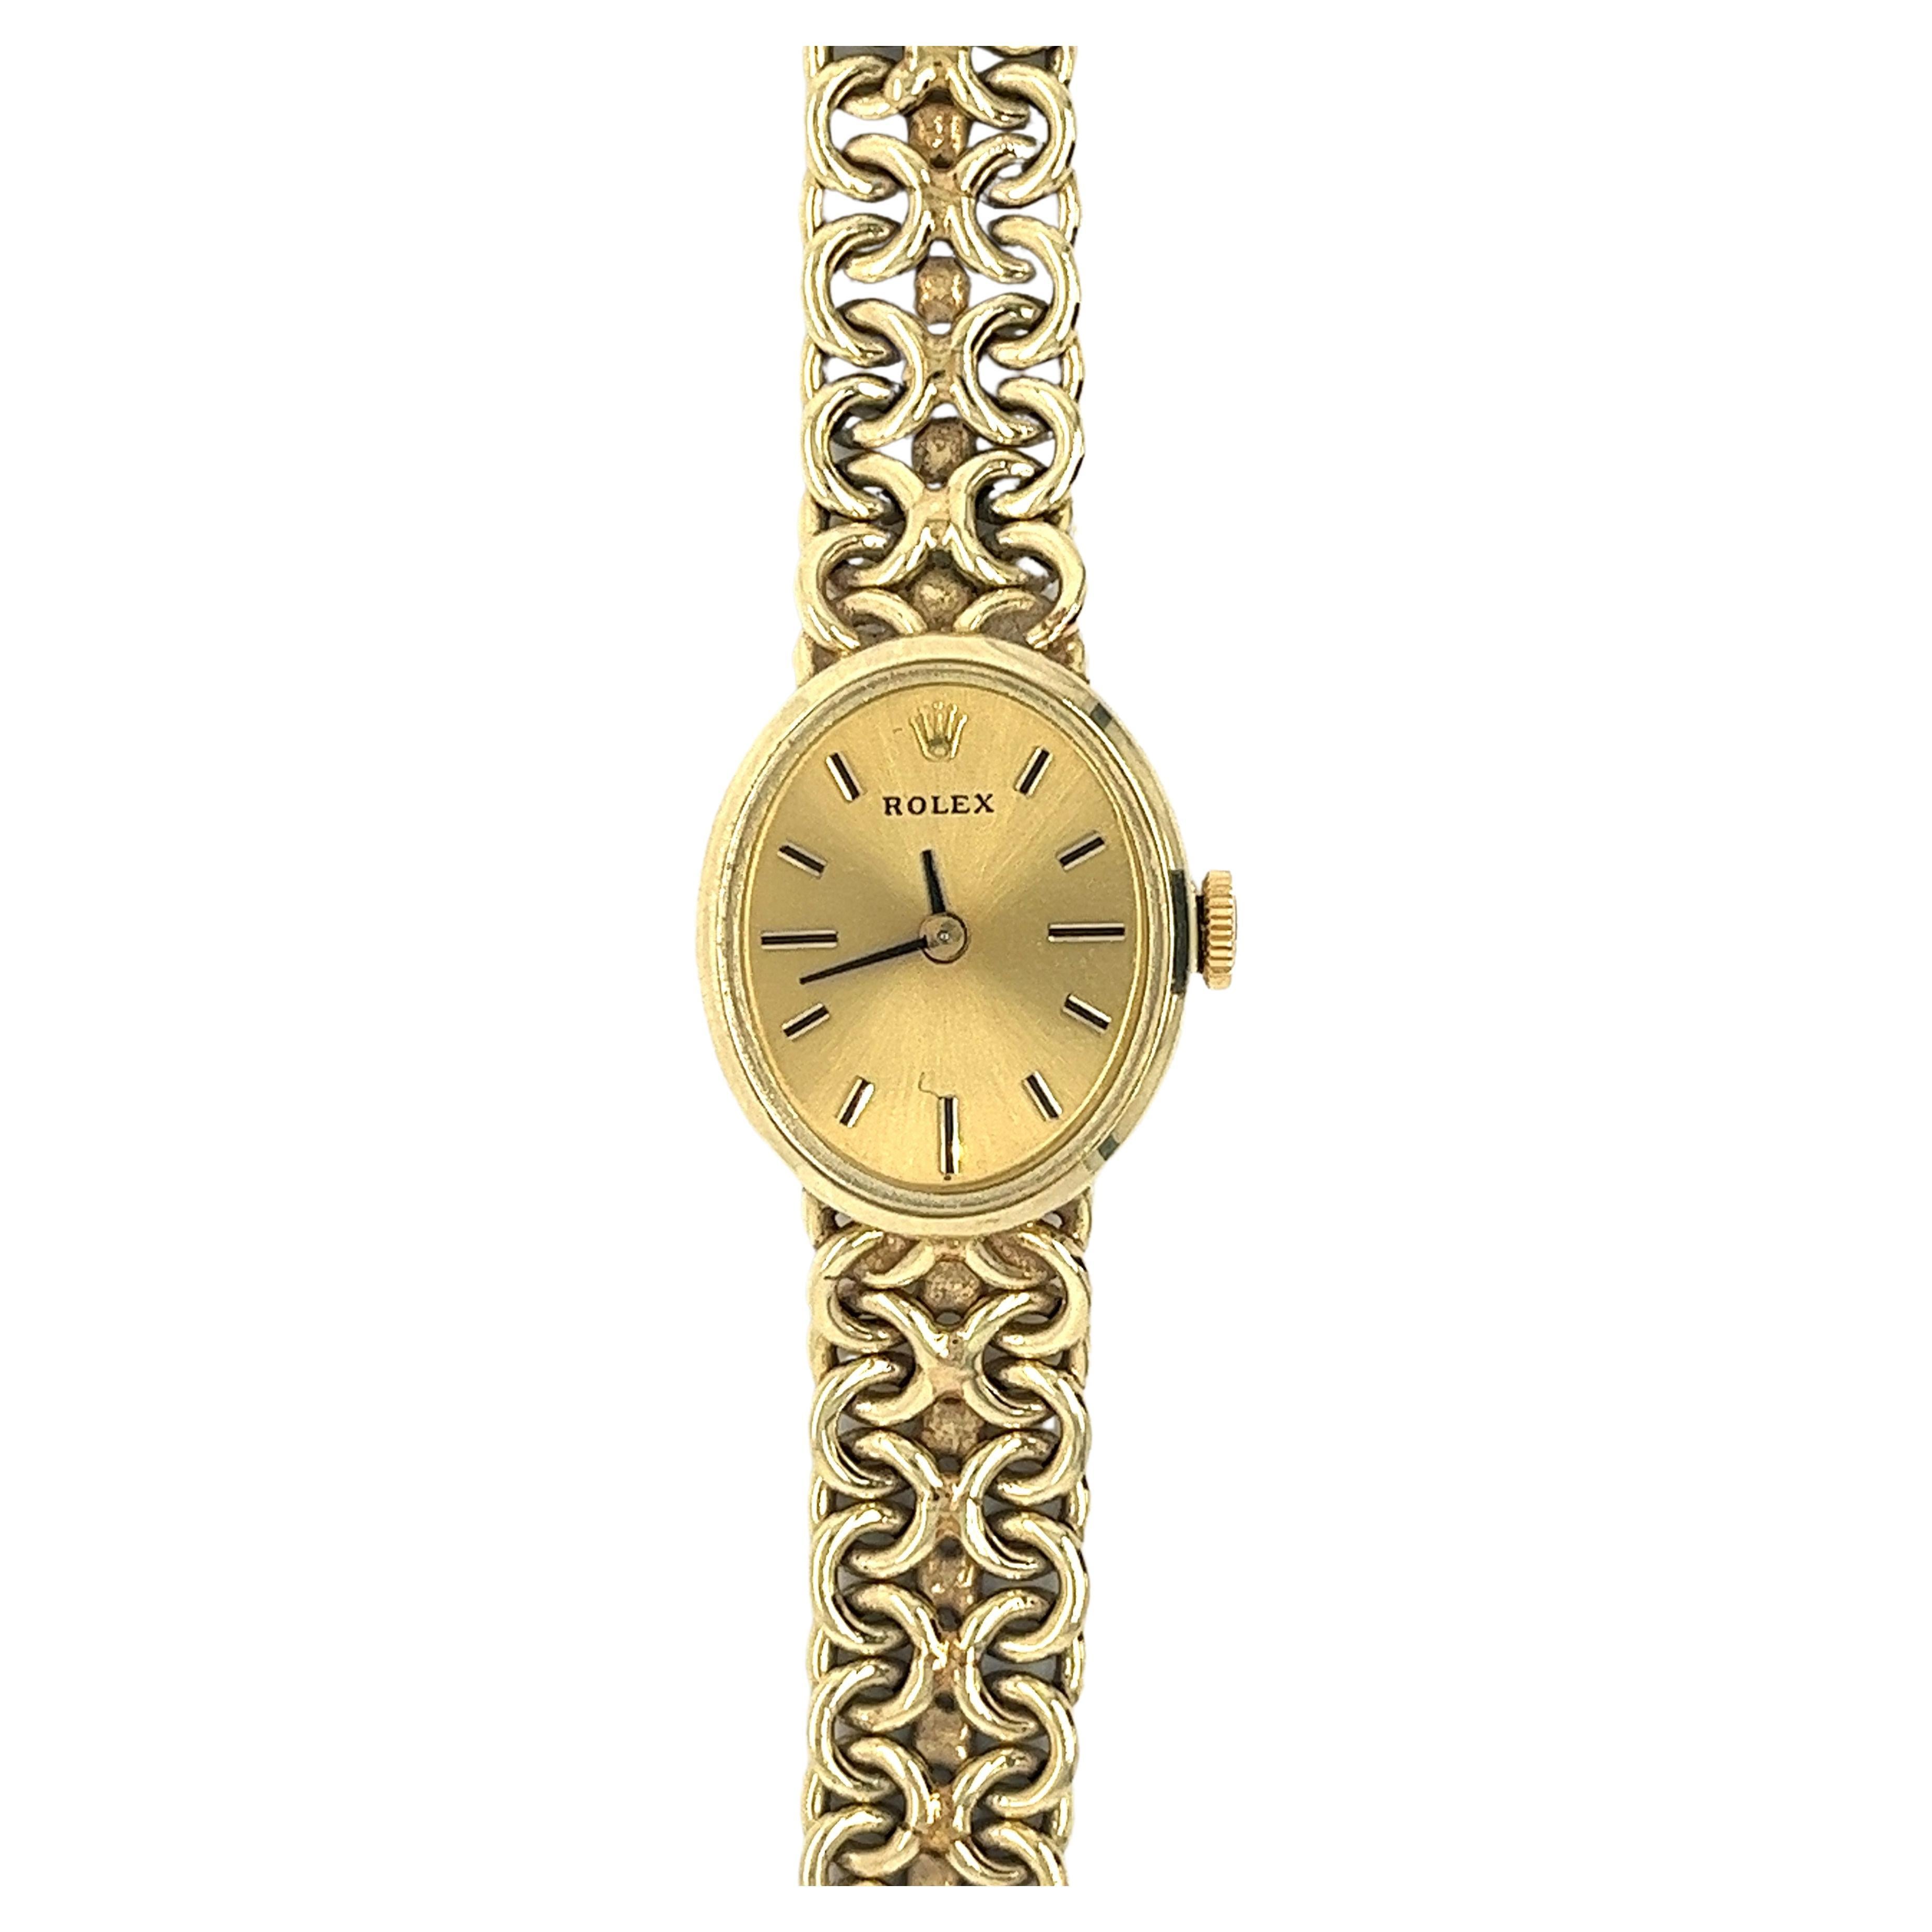 Vintage Rolex Manual Wind Ladies Watch in 14K Yellow Gold in Milanese/Mesh Band